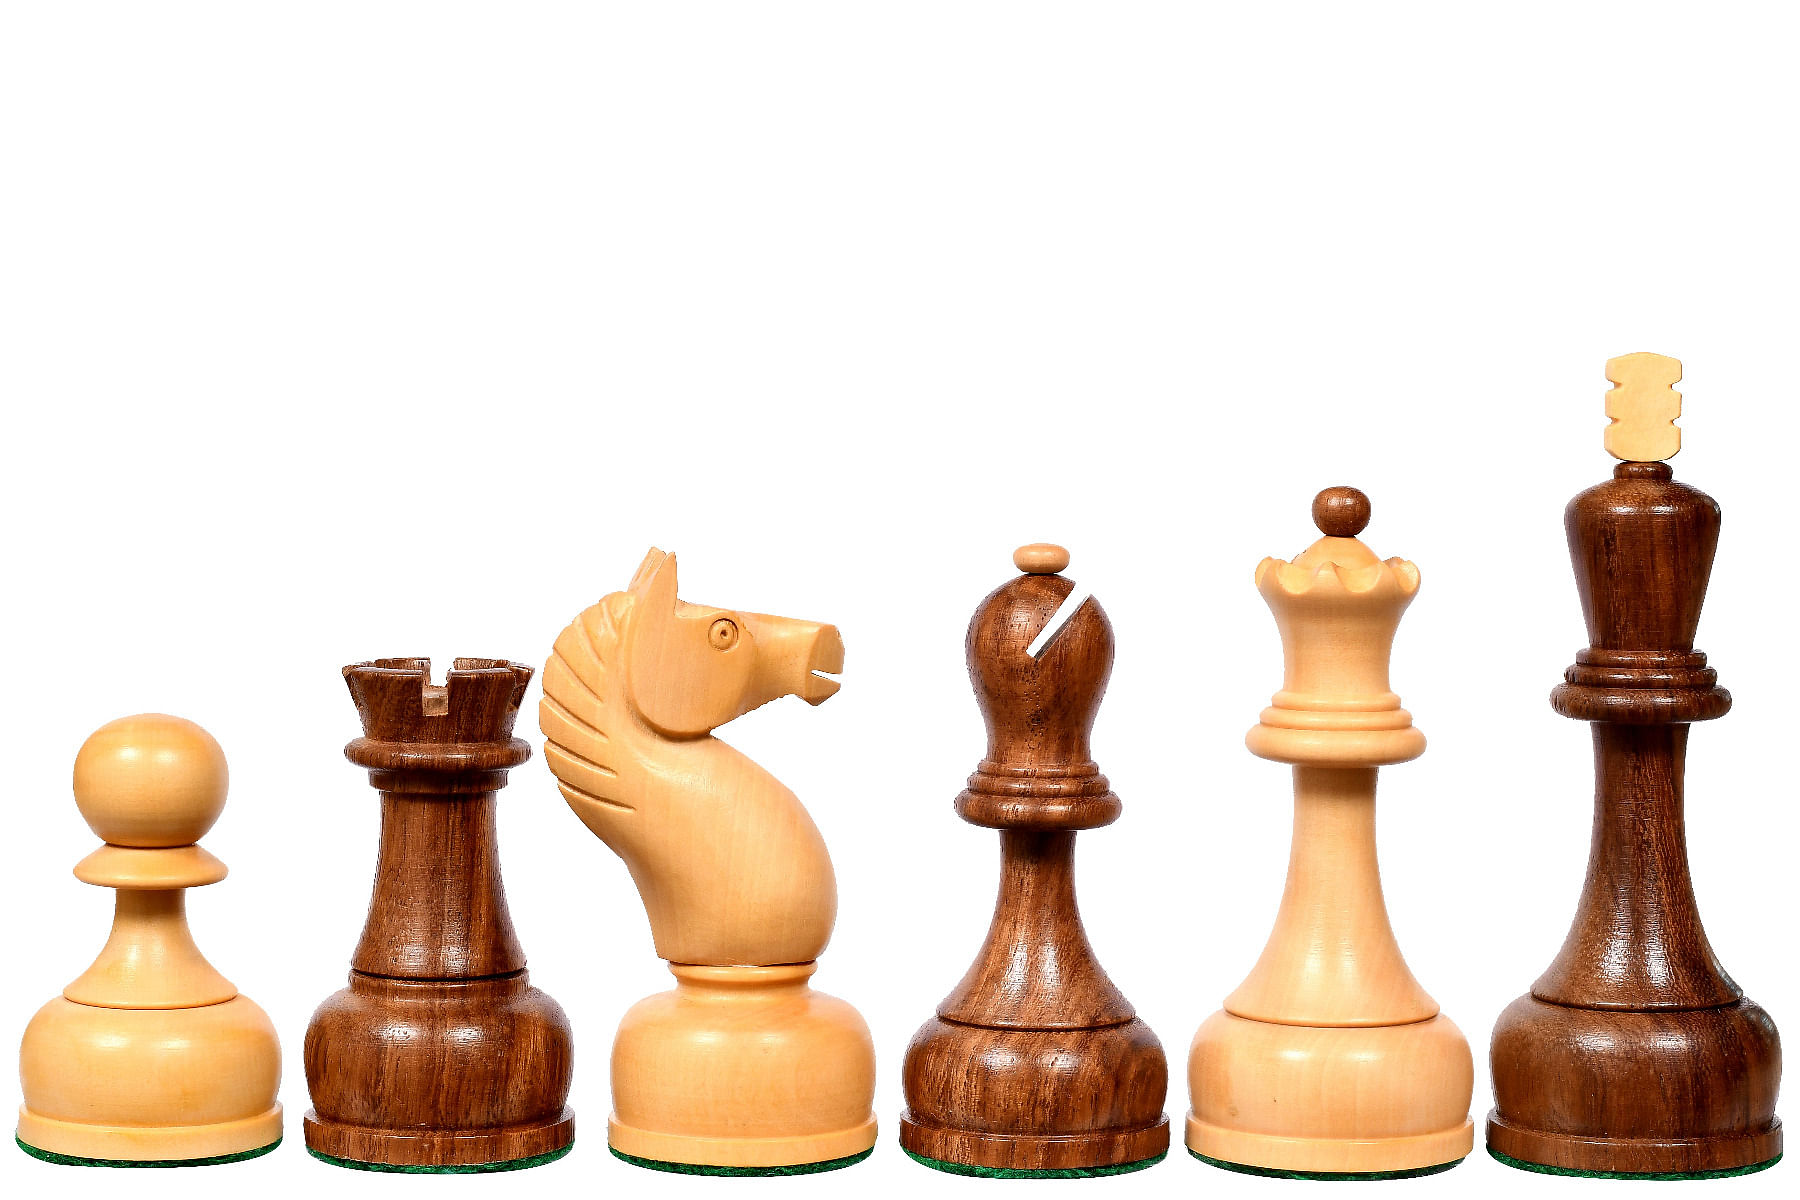 The 1961 Soviet Championship Weighted Wooden Chess Pieces in Sheesham & Boxwood - 4 King